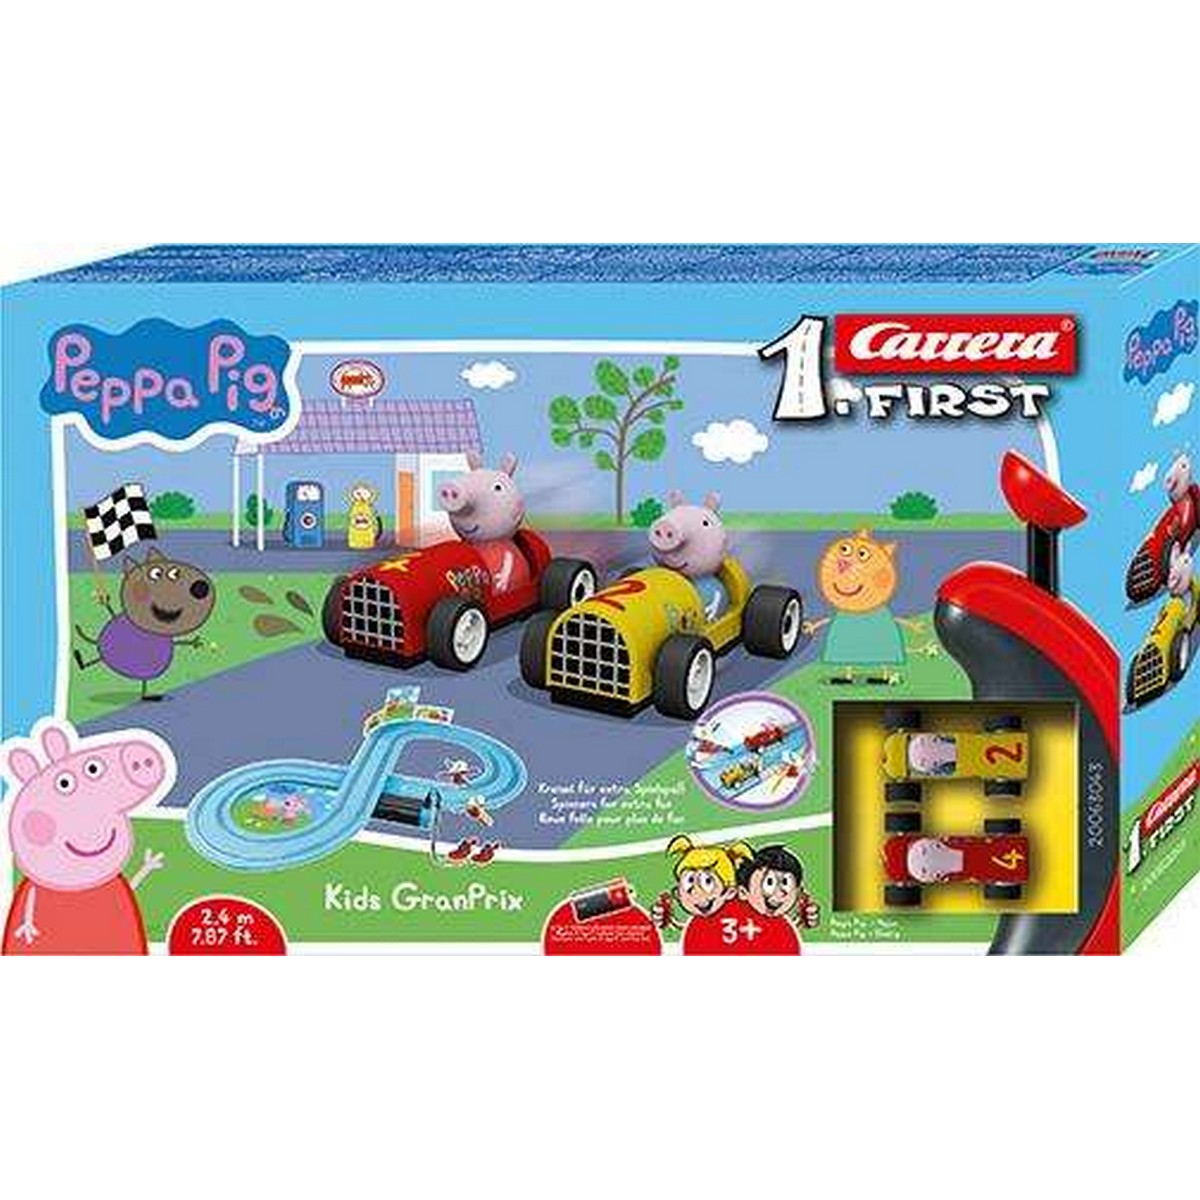 PEPPA PIG 20063043 Spielzeugsets